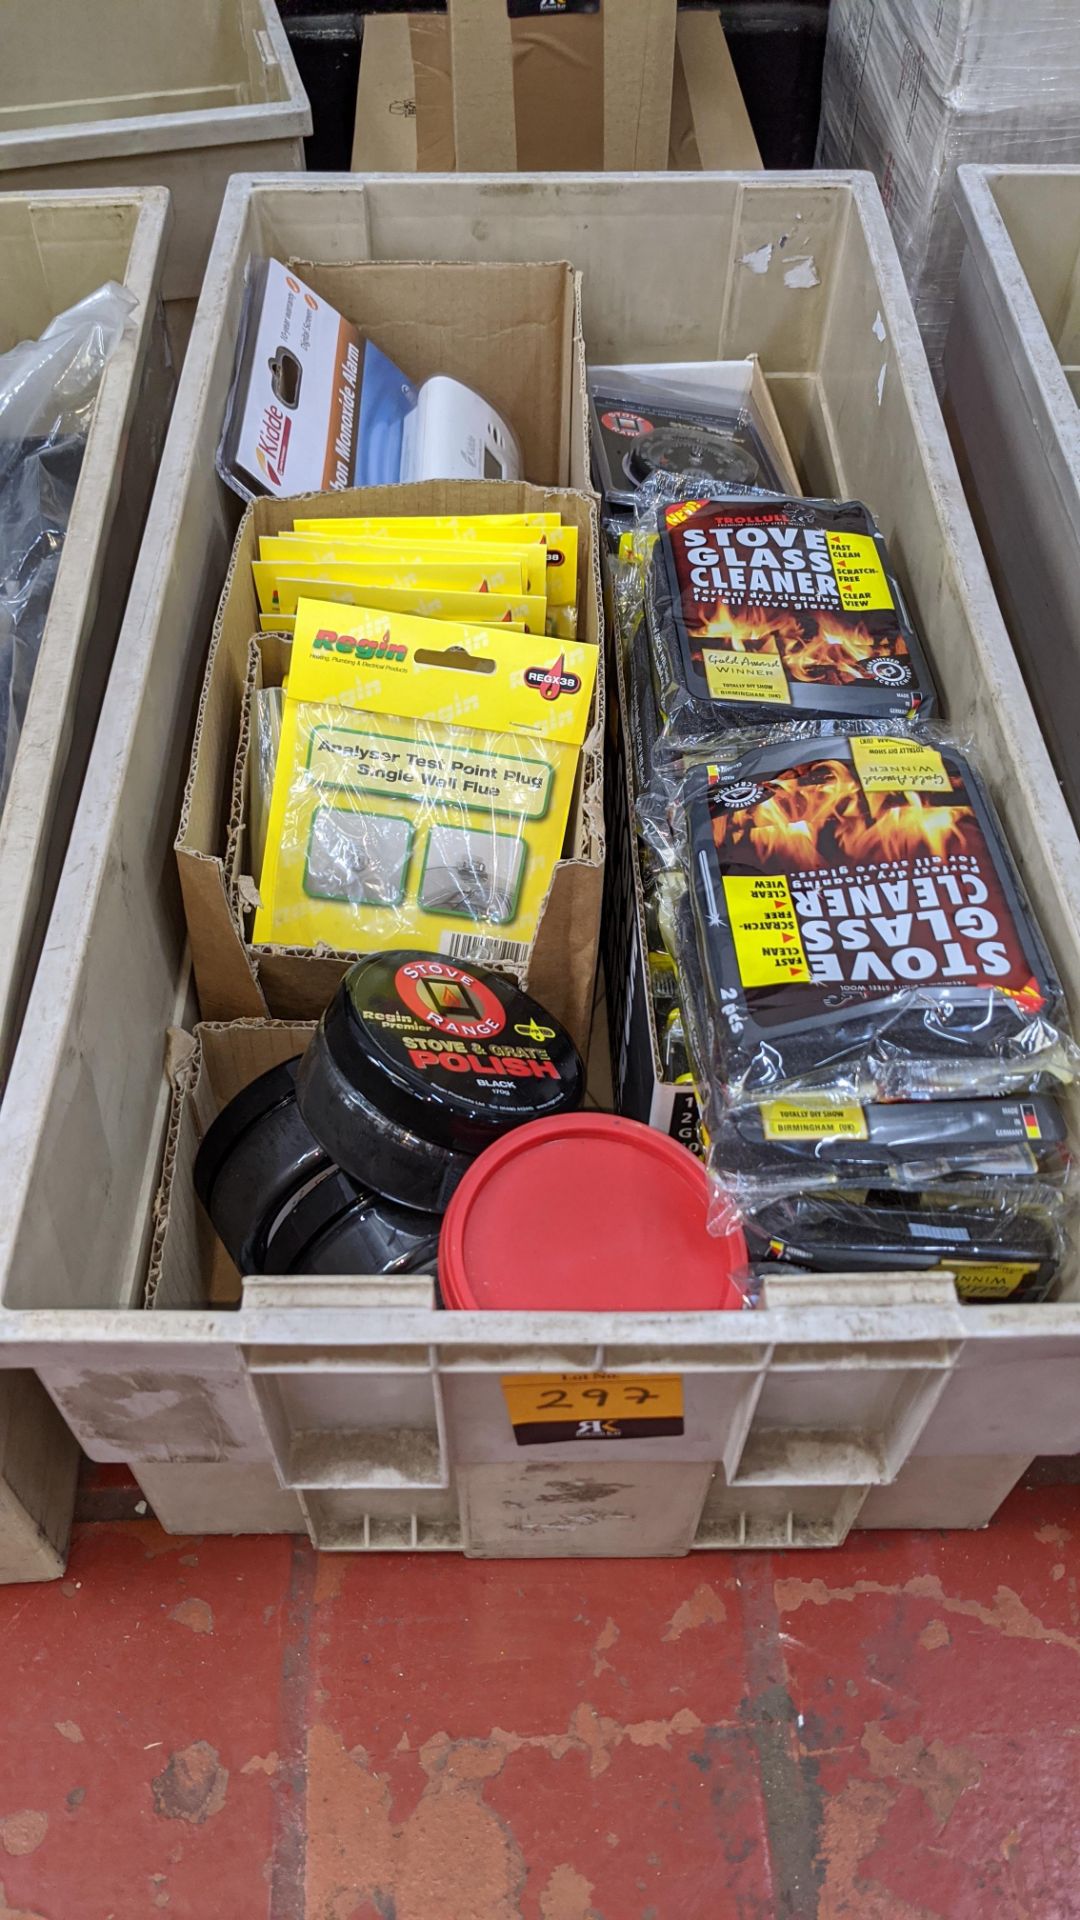 The contents of a crate of miscellaneous items including carbon monoxide alarm, stove polish, thermo